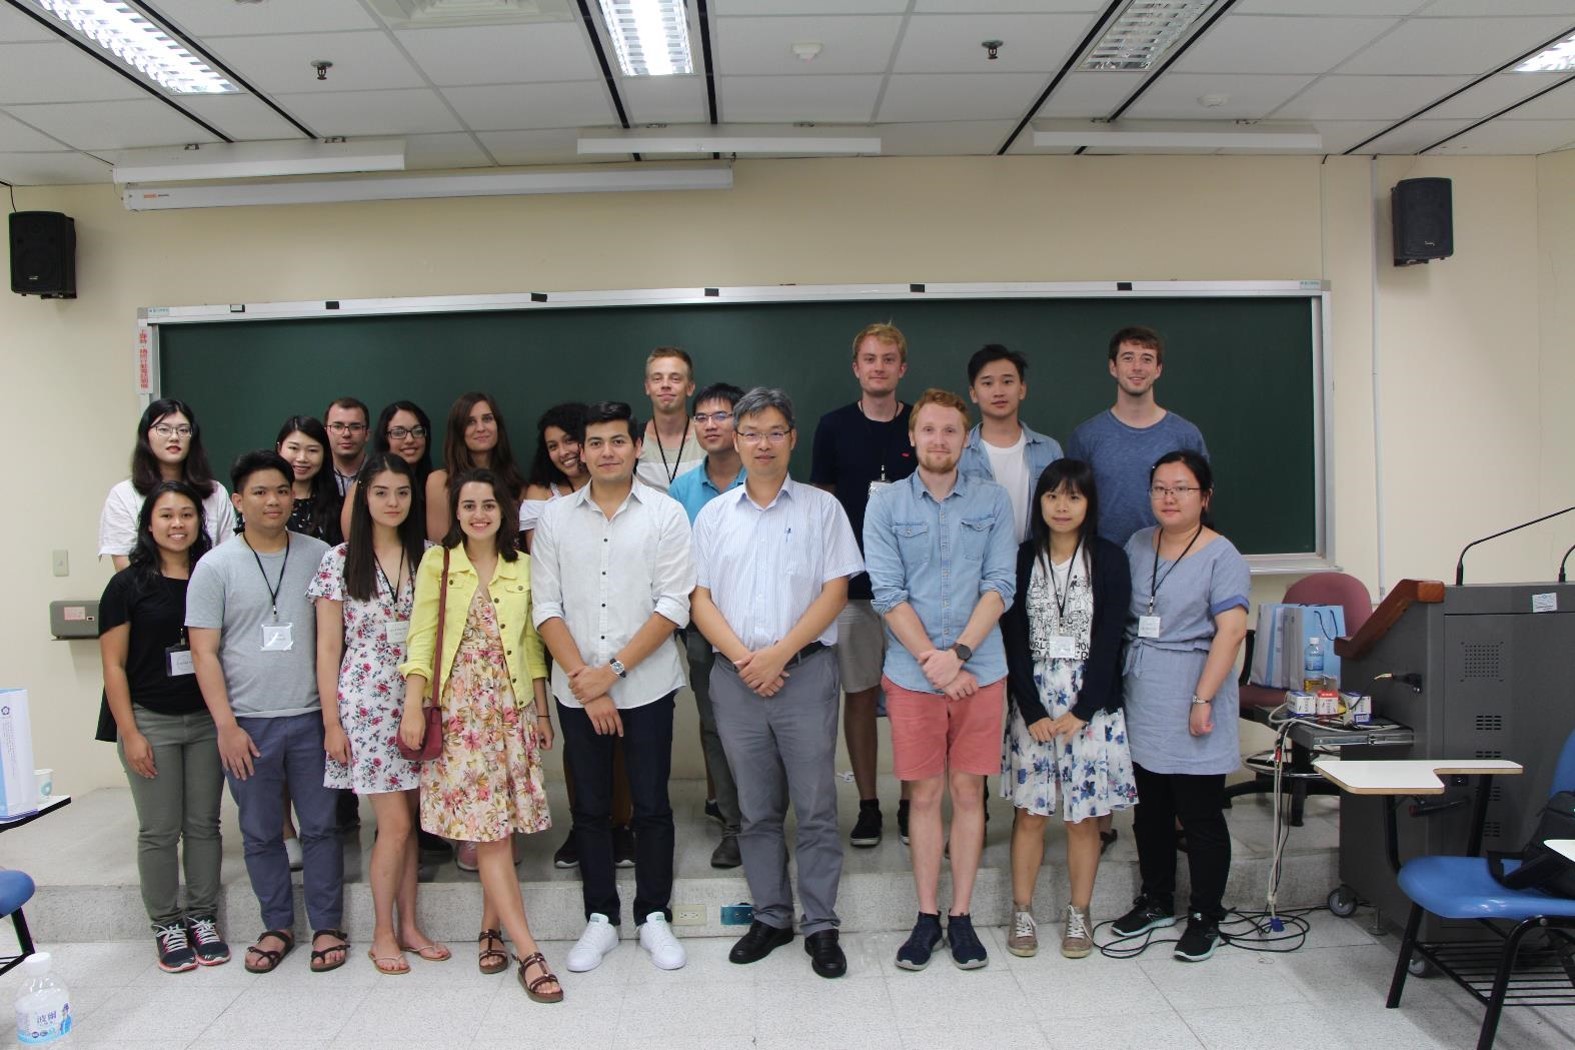 "2018 /9/17 IMES program Incoming Students Orientation, Director Wang takes pictures with IMES students "